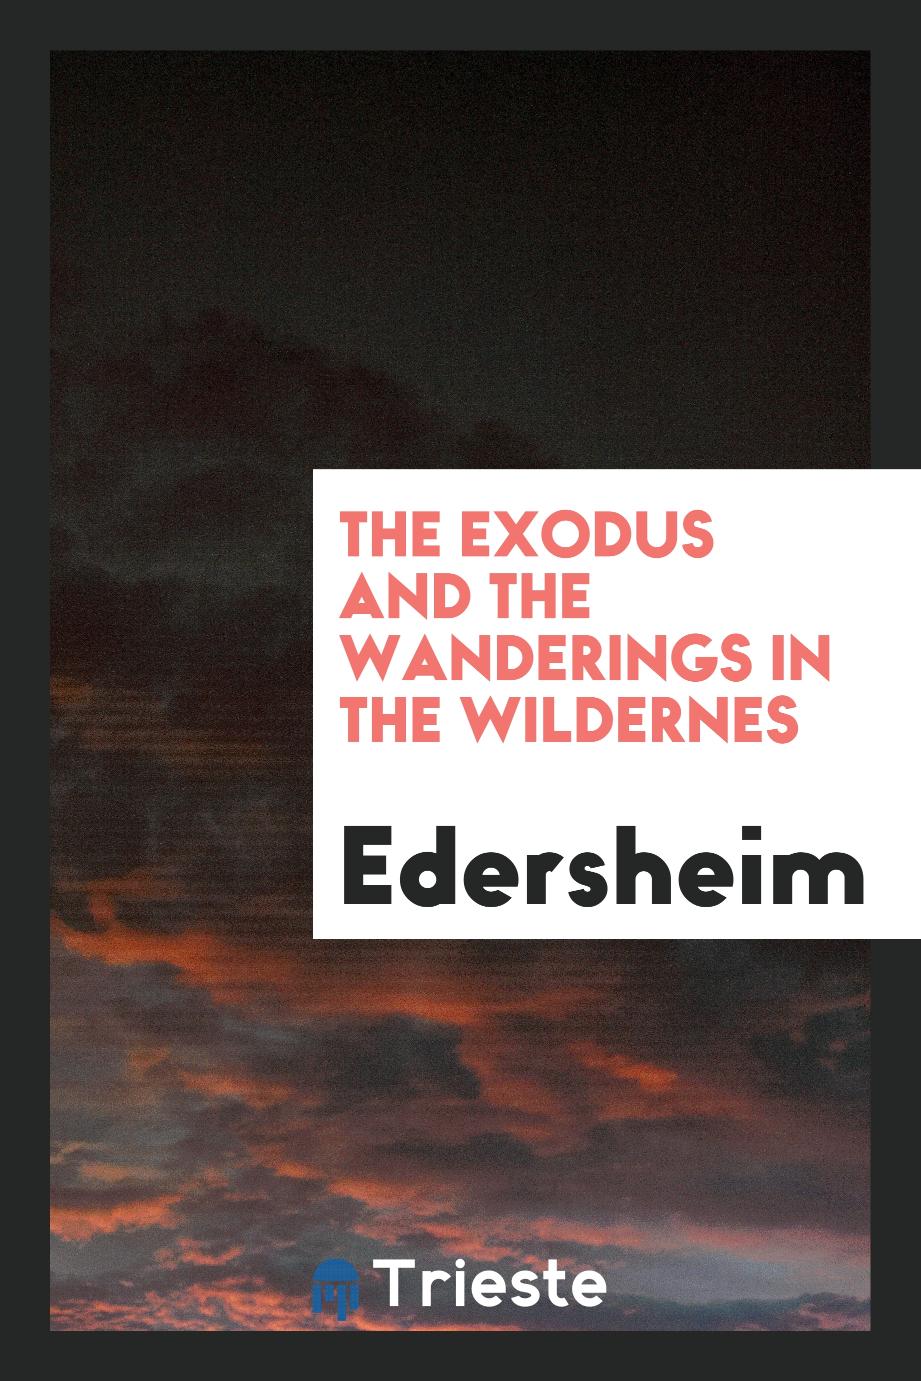 The Exodus and The Wanderings in the Wildernes